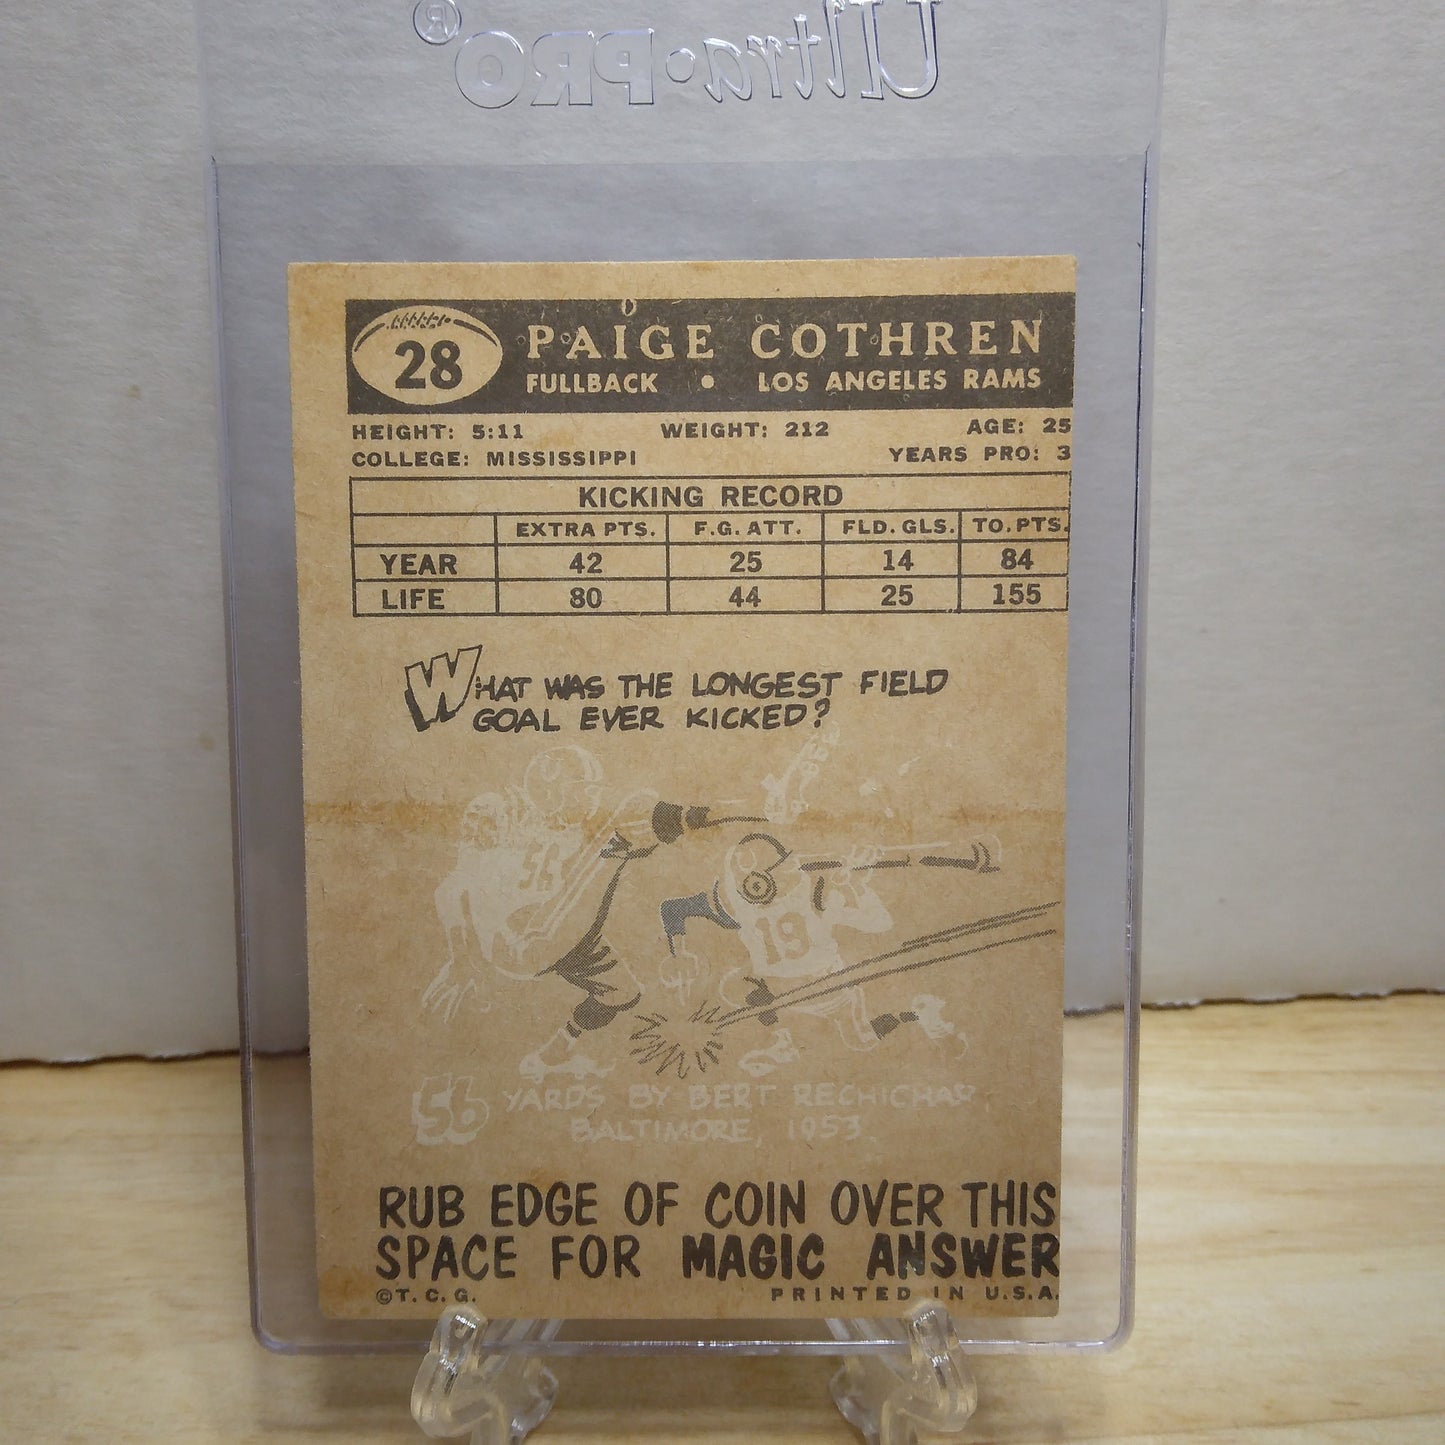 1959 Topps Paige Cothern #28